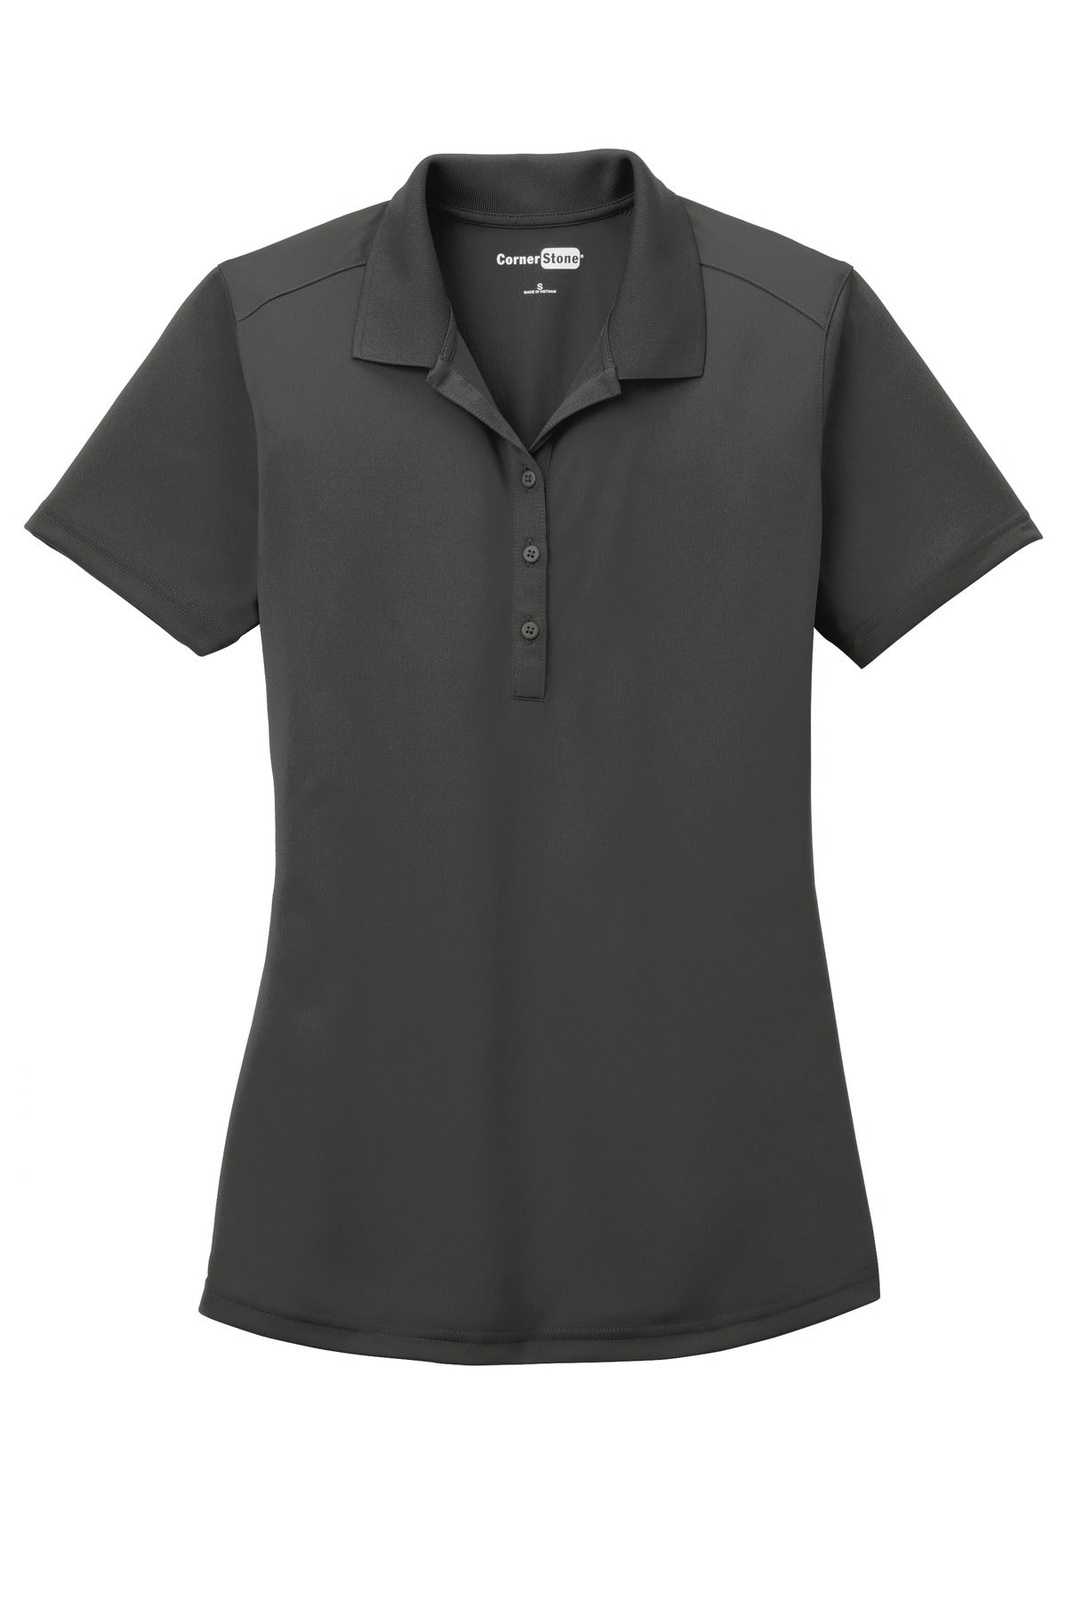 CornerStone CS419 Ladies Select Lightweight Snag-Proof Polo - Charcoal - HIT a Double - 5